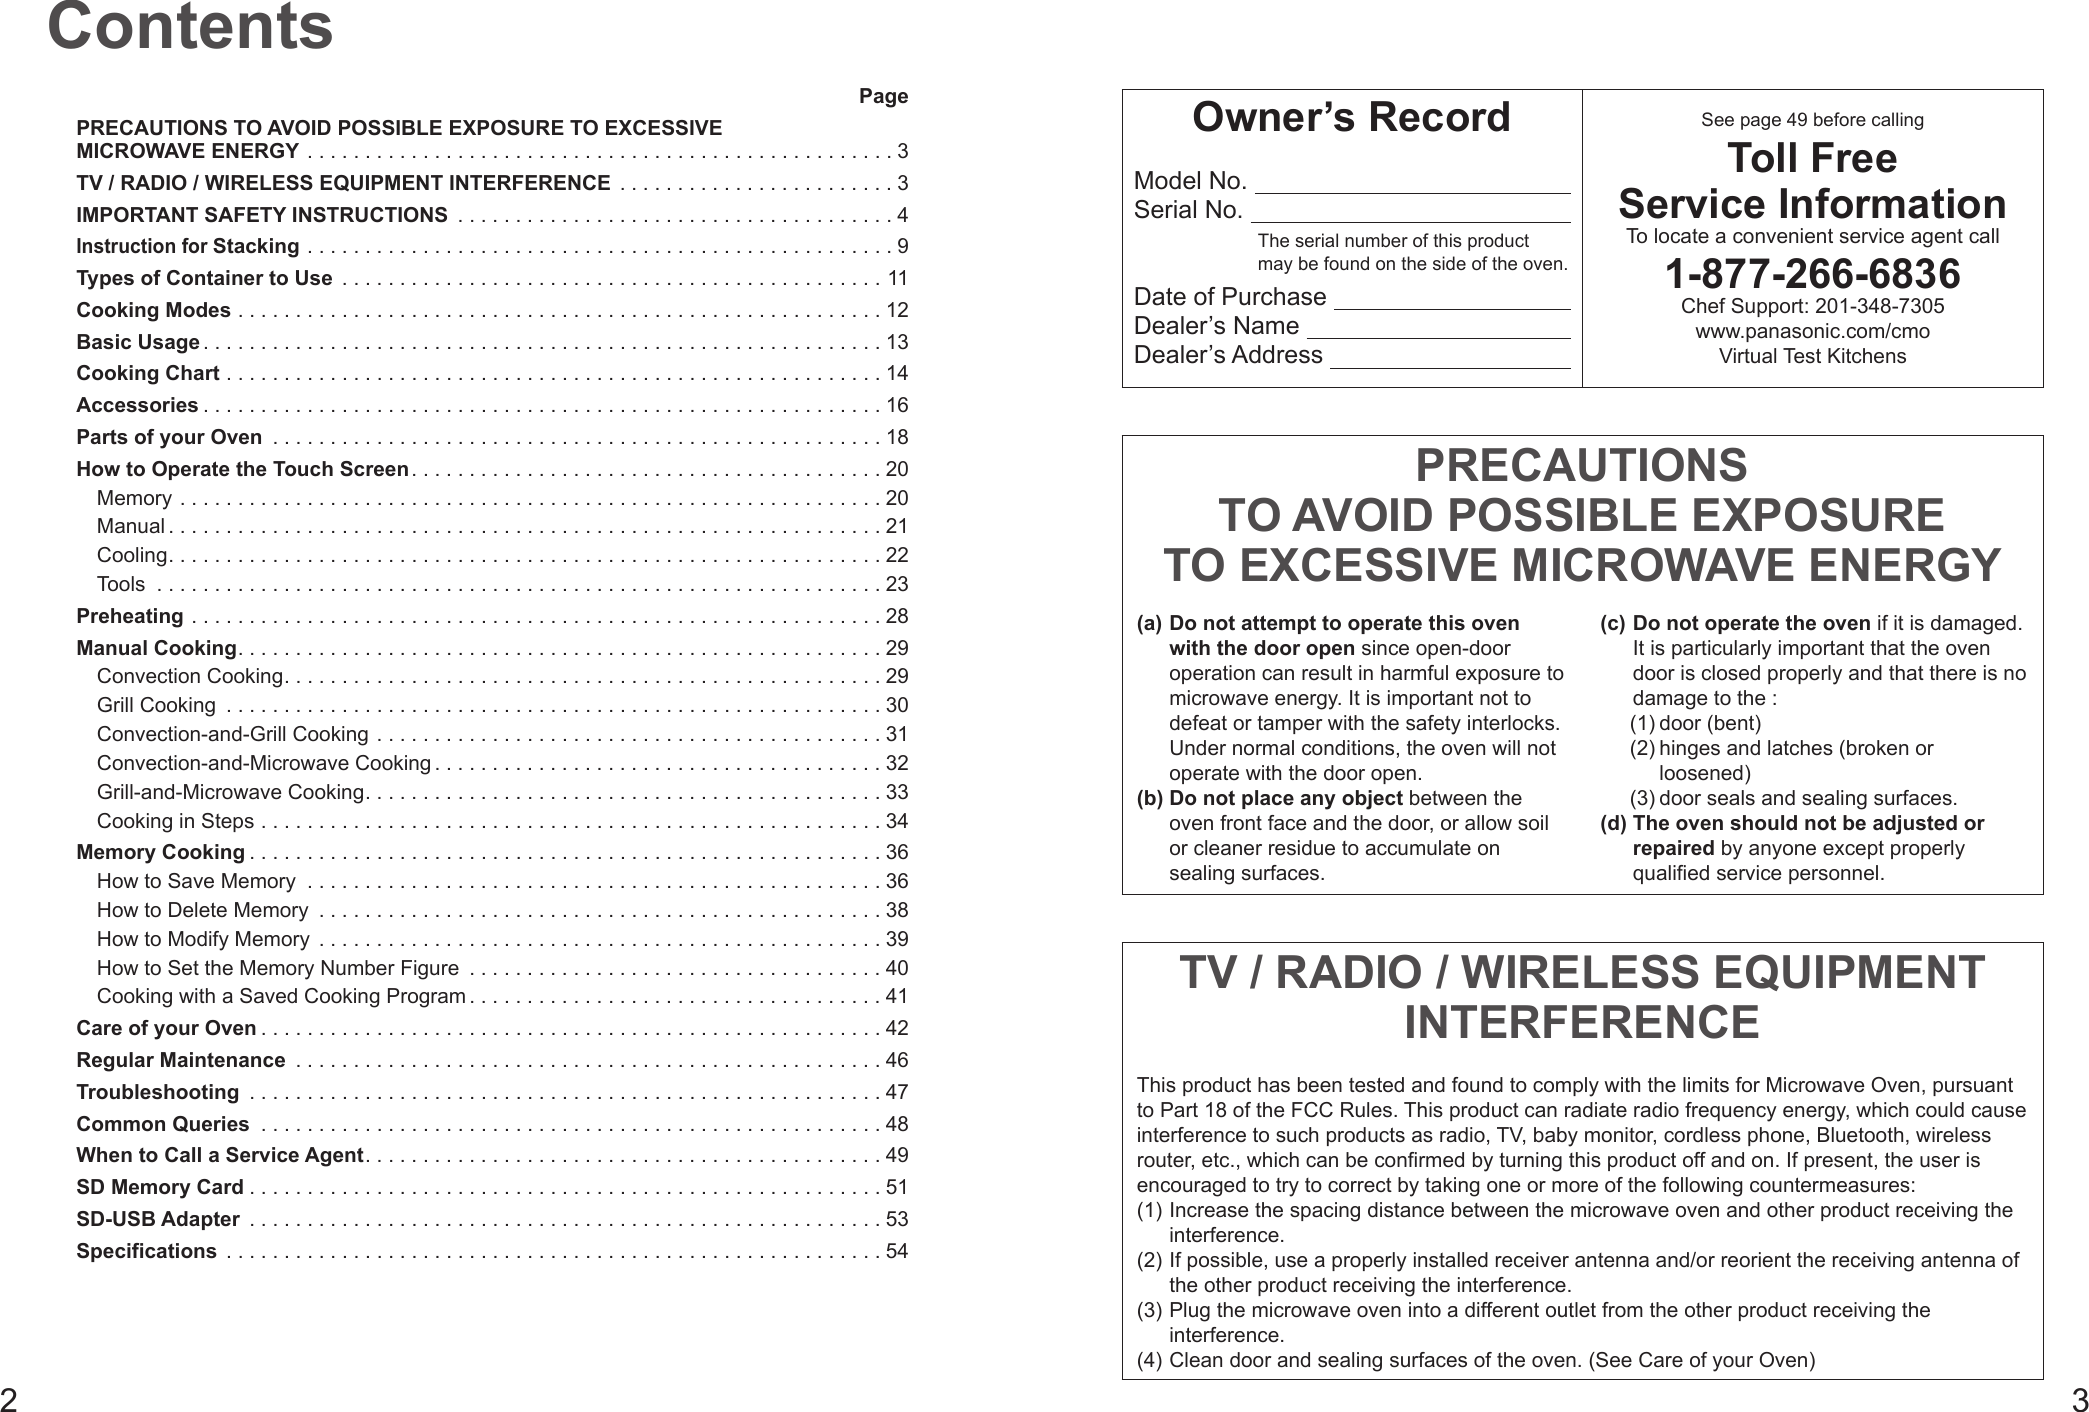 23PagePRECAUTIONS TO AVOID POSSIBLE EXPOSURE TO EXCESSIVE MICROWAVE ENERGY ...................................................3TV / RADIO / WIRELESS EQUIPMENT INTERFERENCE ........................3IMPORTANT SAFETY INSTRUCTIONS ......................................4Instruction for Stacking ...................................................9Types of Container to Use ...............................................11Cooking Modes ........................................................12Basic Usage ...........................................................13Cooking Chart .........................................................14Accessories ...........................................................16Parts of your Oven .....................................................18How to Operate the Touch Screen.........................................20Memory .............................................................20Manual ..............................................................21Cooling..............................................................22Tools ...............................................................23Preheating ............................................................28Manual Cooking........................................................29Convection Cooking....................................................29Grill Cooking .........................................................30Convection-and-Grill Cooking ............................................31Convection-and-Microwave Cooking .......................................32Grill-and-Microwave Cooking.............................................33Cooking in Steps ......................................................34Memory Cooking .......................................................36How to Save Memory ..................................................36How to Delete Memory .................................................38How to Modify Memory .................................................39How to Set the Memory Number Figure ....................................40Cooking with a Saved Cooking Program ....................................41Care of your Oven ......................................................42Regular Maintenance ...................................................46Troubleshooting .......................................................47Common Queries ......................................................48When to Call a Service Agent.............................................49SD Memory Card .......................................................51SD-USB Adapter .......................................................53Specifications .........................................................54ContentsOwner’s RecordModel No.  Serial No.  The serial number of this product  may be found on the side of the oven.Date of Purchase  Dealer’s Name  Dealer’s Address  See page 49 before callingToll Free Service InformationTo locate a convenient service agent call1-877-266-6836Chef Support: 201-348-7305 www.panasonic.com/cmo Virtual Test KitchensPRECAUTIONS TO AVOID POSSIBLE EXPOSURE TO EXCESSIVE MICROWAVE ENERGY(a) Do not attempt to operate this oven with the door open since open-door operation can result in harmful exposure to microwave energy. It is important not to defeat or tamper with the safety interlocks. Under normal conditions, the oven will not operate with the door open.(b) Do not place any object between the oven front face and the door, or allow soil or cleaner residue to accumulate on sealing surfaces.(c) Do not operate the oven if it is damaged. It is particularly important that the oven door is closed properly and that there is no damage to the :(1) door (bent)(2) hinges and latches (broken or loosened)(3) door seals and sealing surfaces.(d) The oven should not be adjusted or repaired by anyone except properly qualified service personnel.TV / RADIO / WIRELESS EQUIPMENT INTERFERENCEThis product has been tested and found to comply with the limits for Microwave Oven, pursuant to Part 18 of the FCC Rules. This product can radiate radio frequency energy, which could cause interference to such products as radio, TV, baby monitor, cordless phone, Bluetooth, wireless router, etc., which can be confirmed by turning this product off and on. If present, the user is  encouraged to try to correct by taking one or more of the following countermeasures:(1) Increase the spacing distance between the microwave oven and other product receiving the interference.(2) If possible, use a properly installed receiver antenna and/or reorient the receiving antenna of the other product receiving the interference.(3) Plug the microwave oven into a different outlet from the other product receiving the interference.(4) Clean door and sealing surfaces of the oven. (See Care of your Oven)